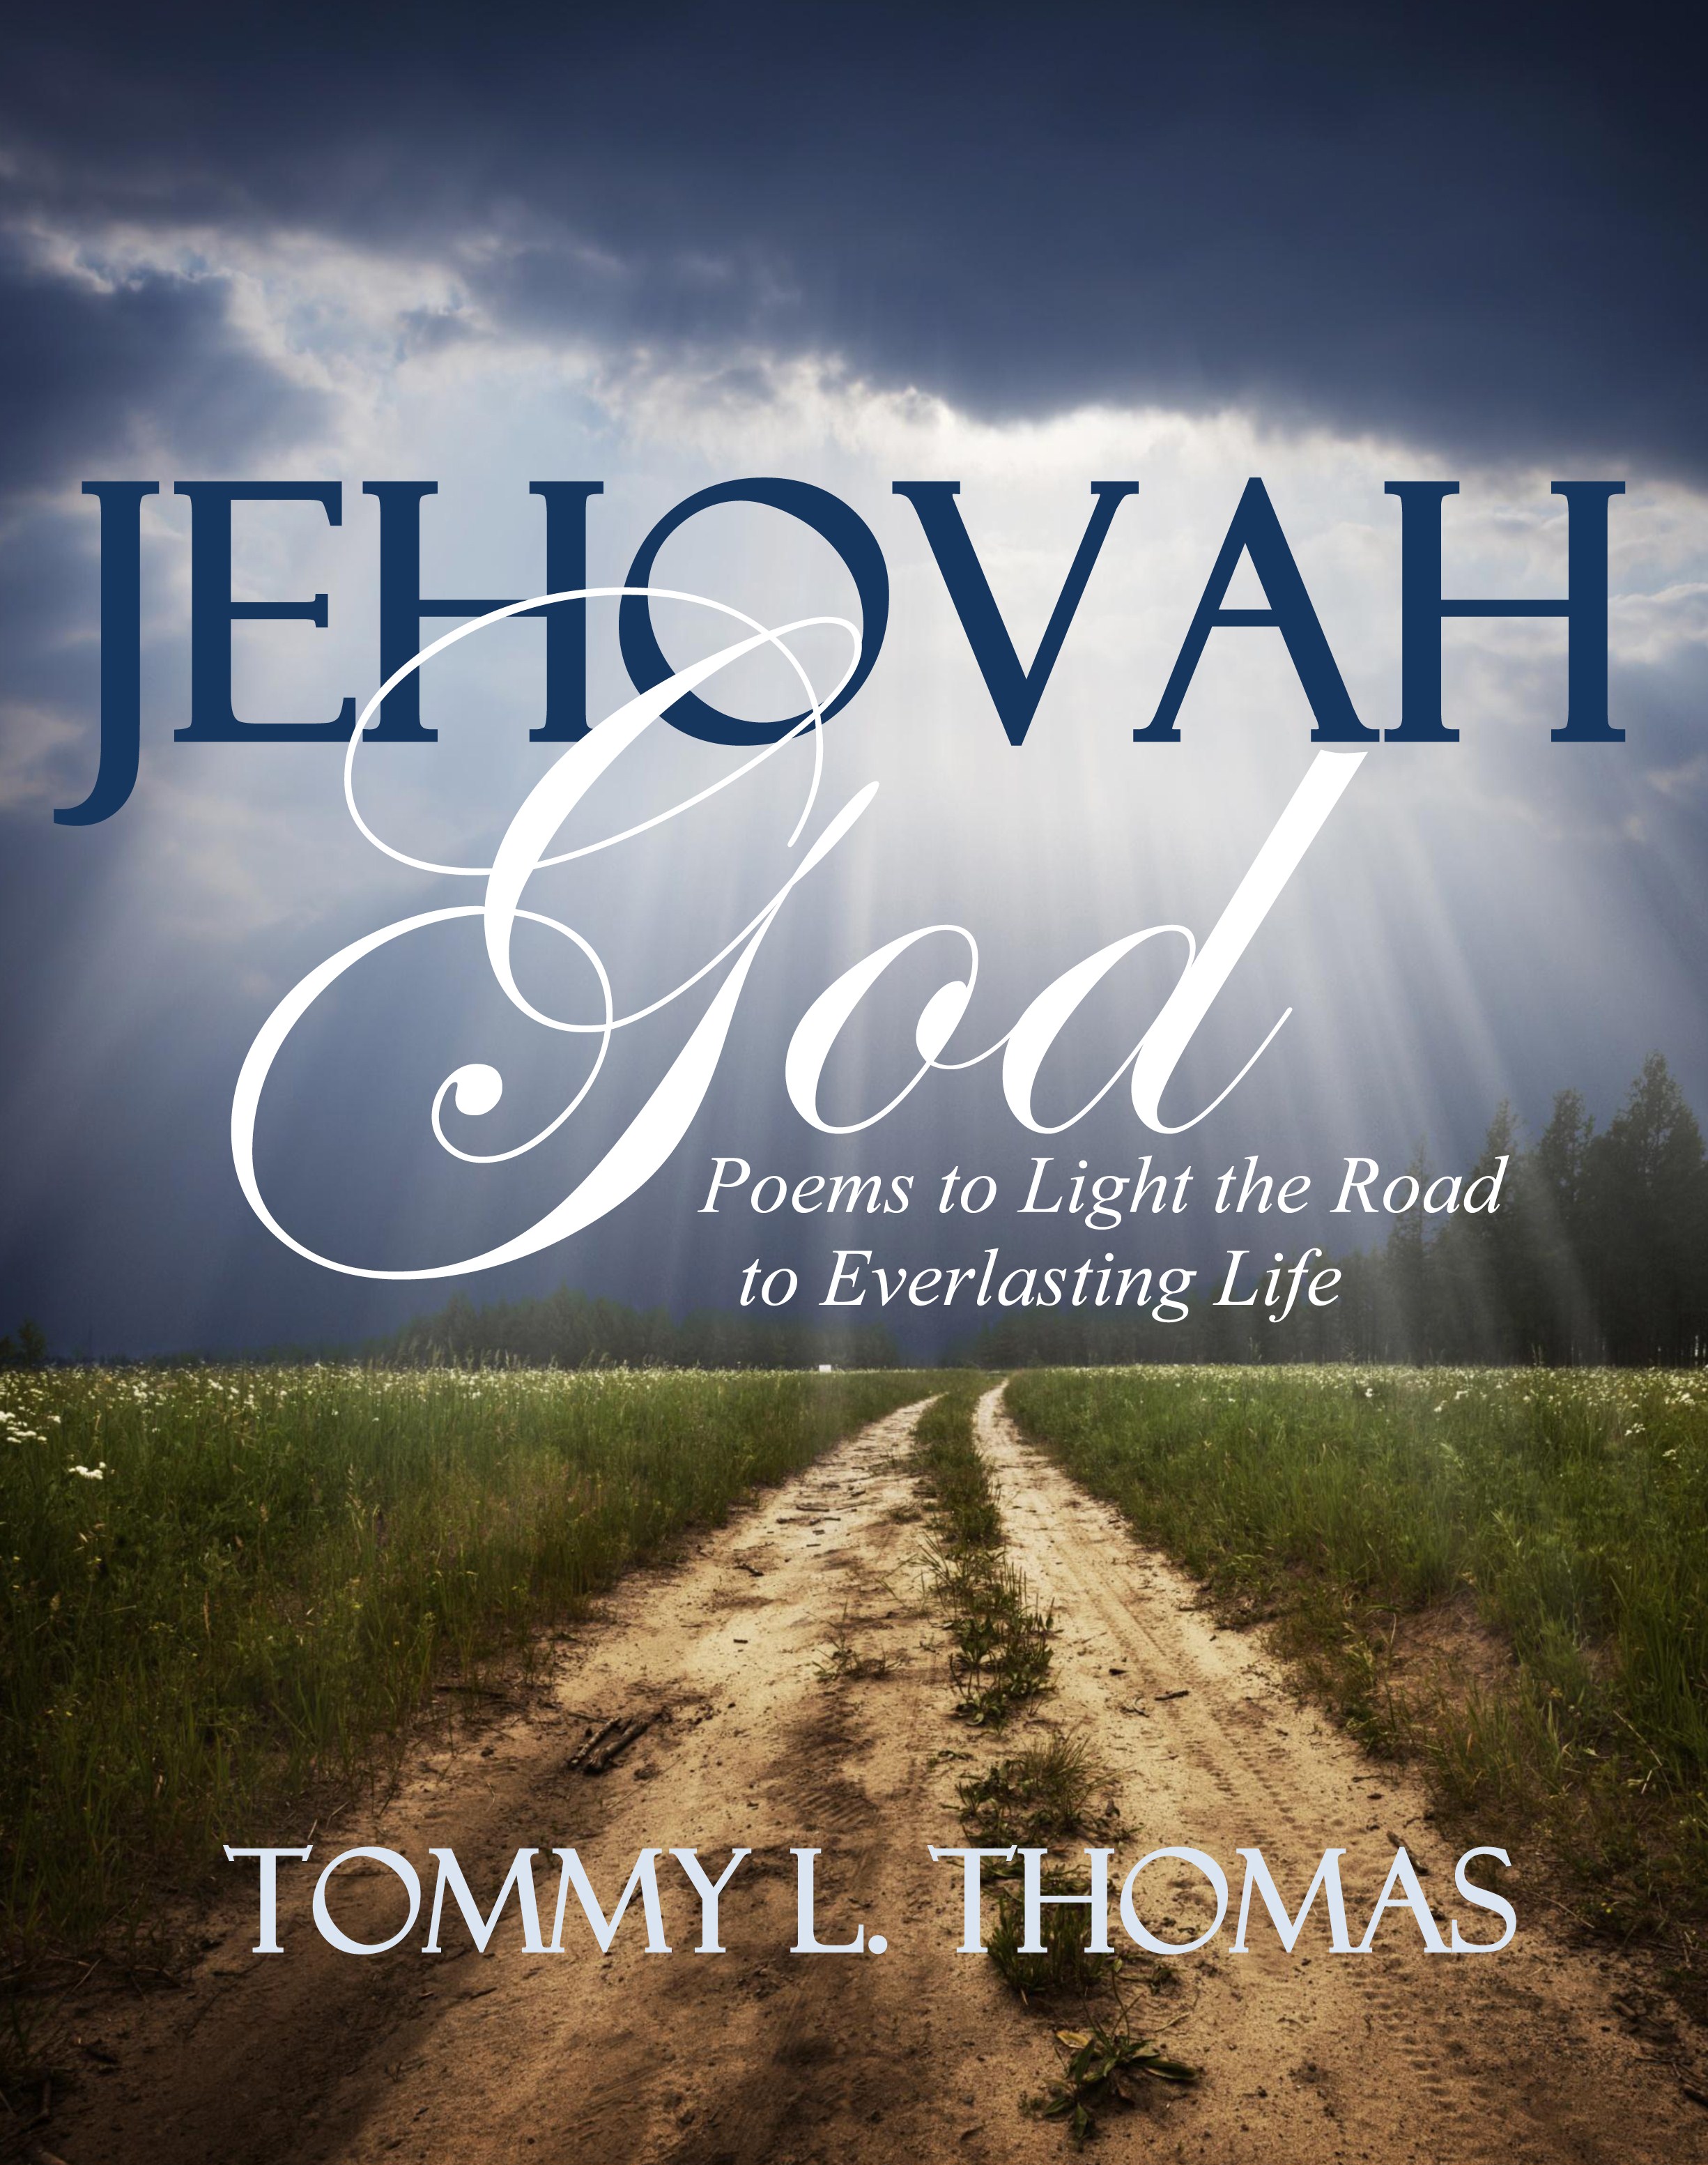 New Poems  Tommy L  Thomas S  Jehovah God  Poems To Light The Road